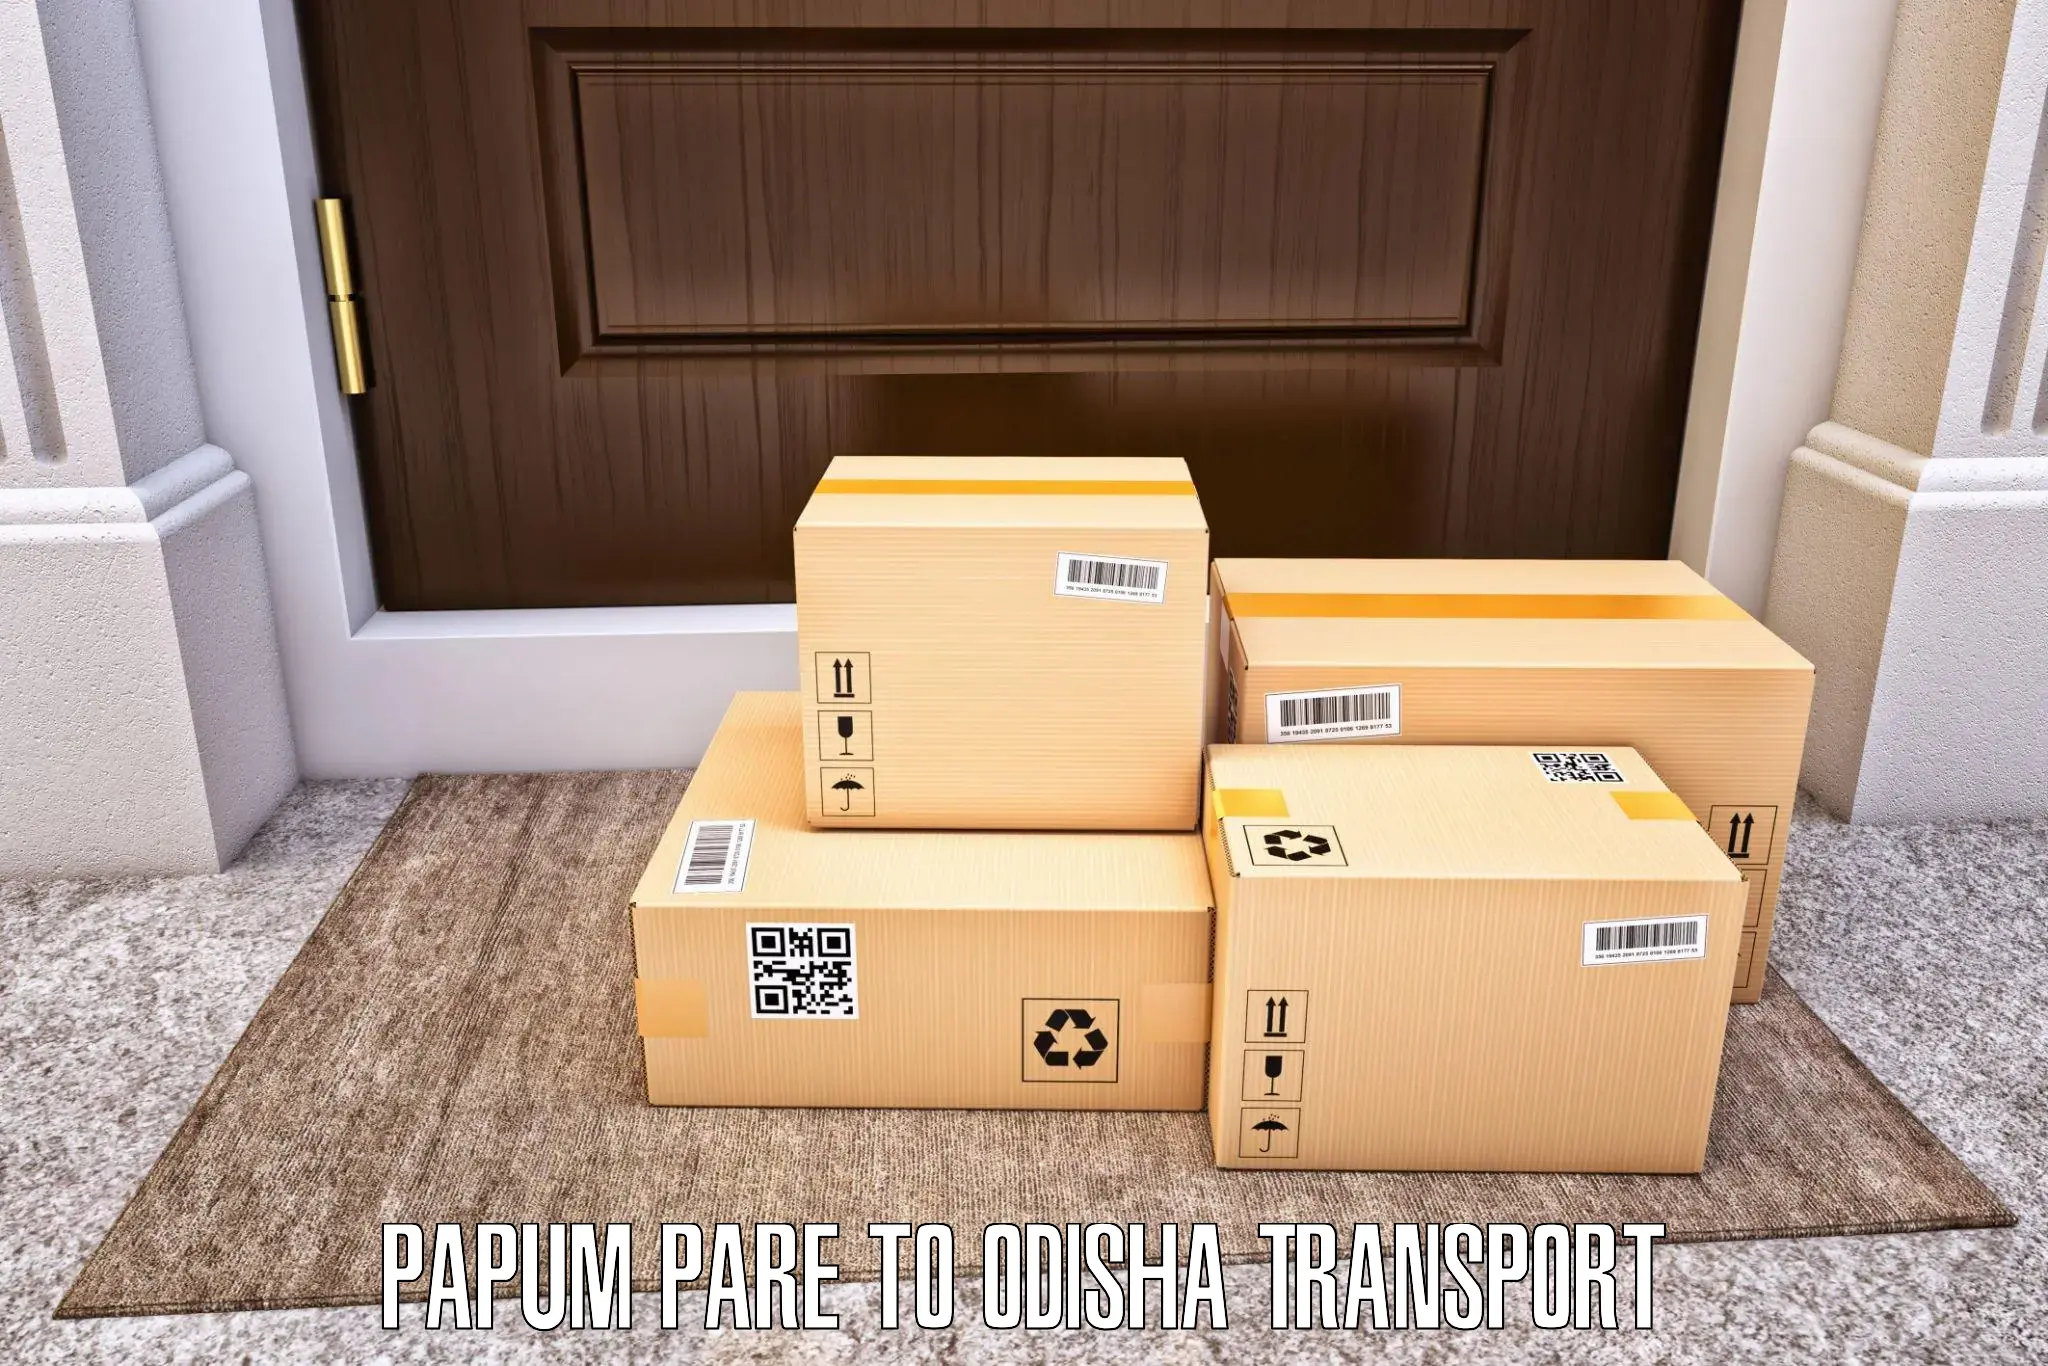 Daily parcel service transport Papum Pare to Umerkote